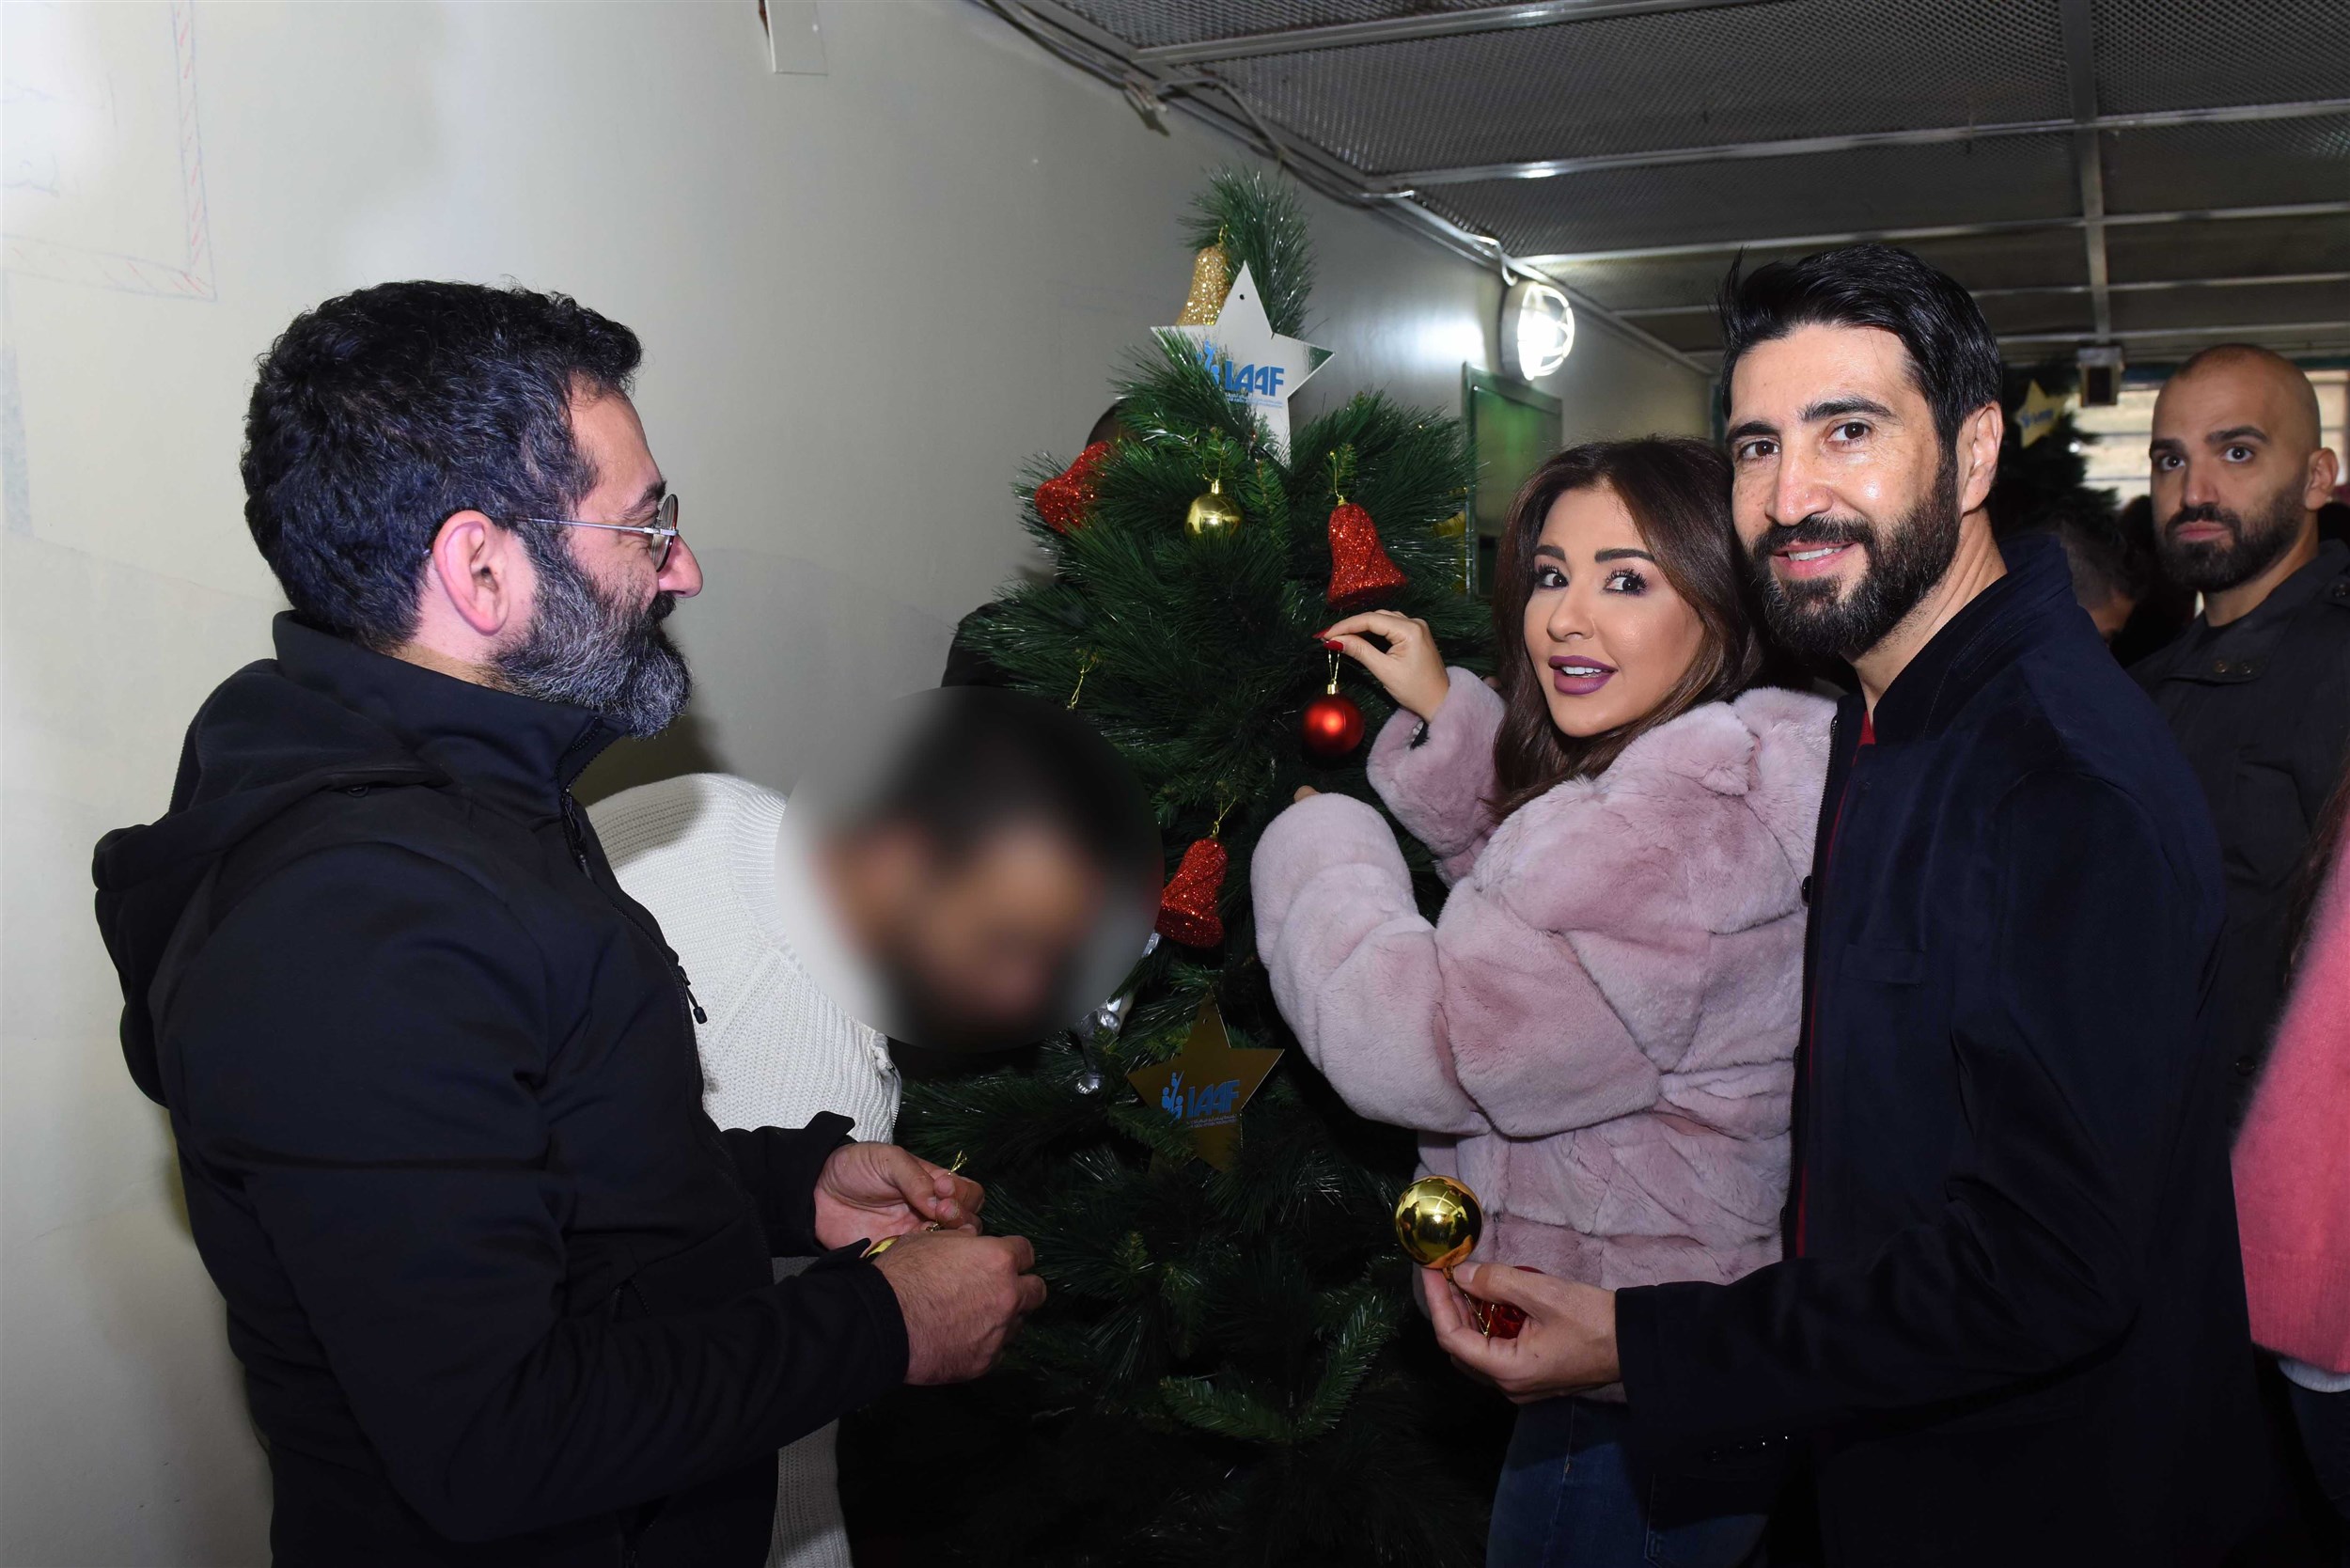 actress magguy bou ghosn, actor wissam sabbagh and actor georges khabbaz gathered around the christmas tree in a holy atmosphere.